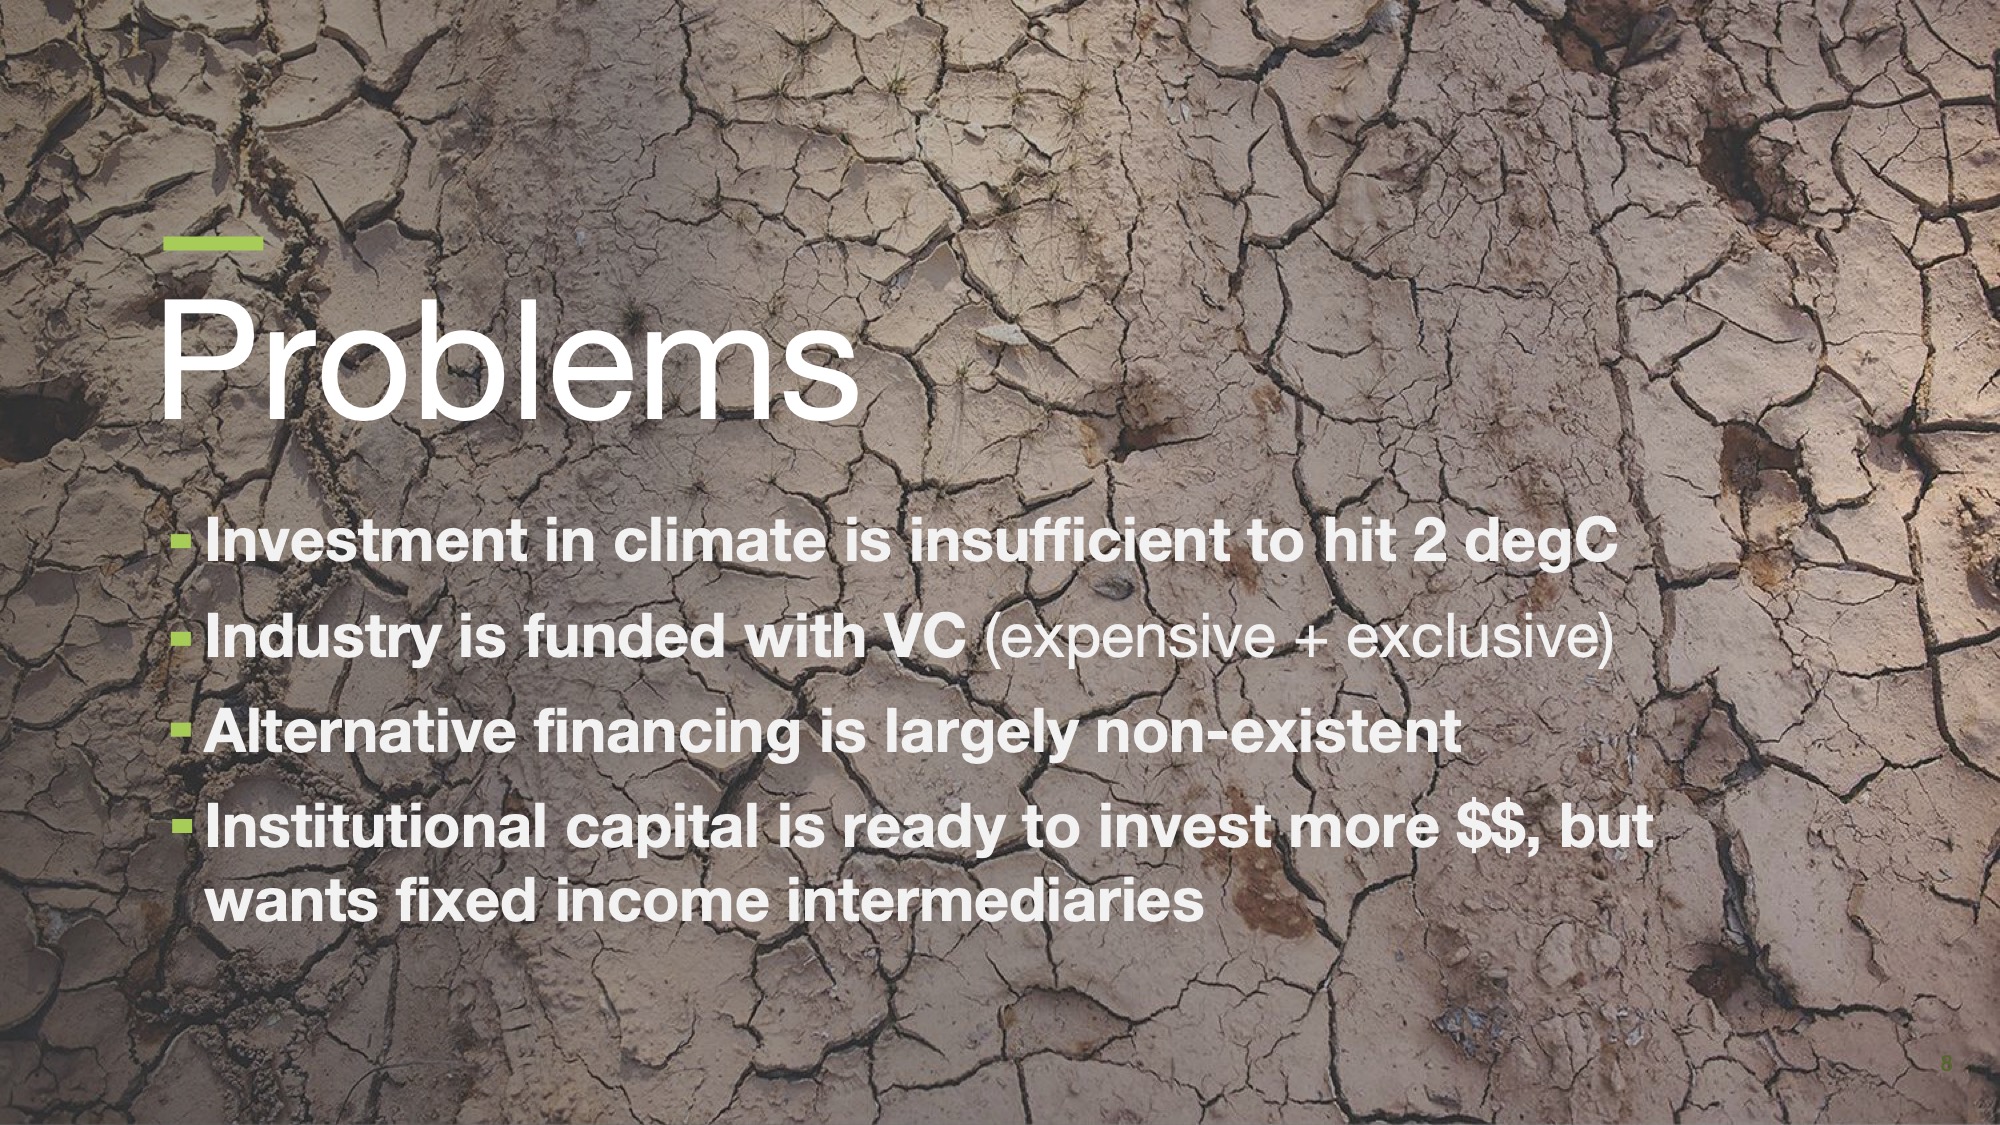 Problems - Investment in climate is insufficient to hit 2 degC Industry is funded with VC (expensive + exclusive) Alternative financing is largely non-existent Institutional capital is ready to invest more $$, but wants fixed income intermediaries